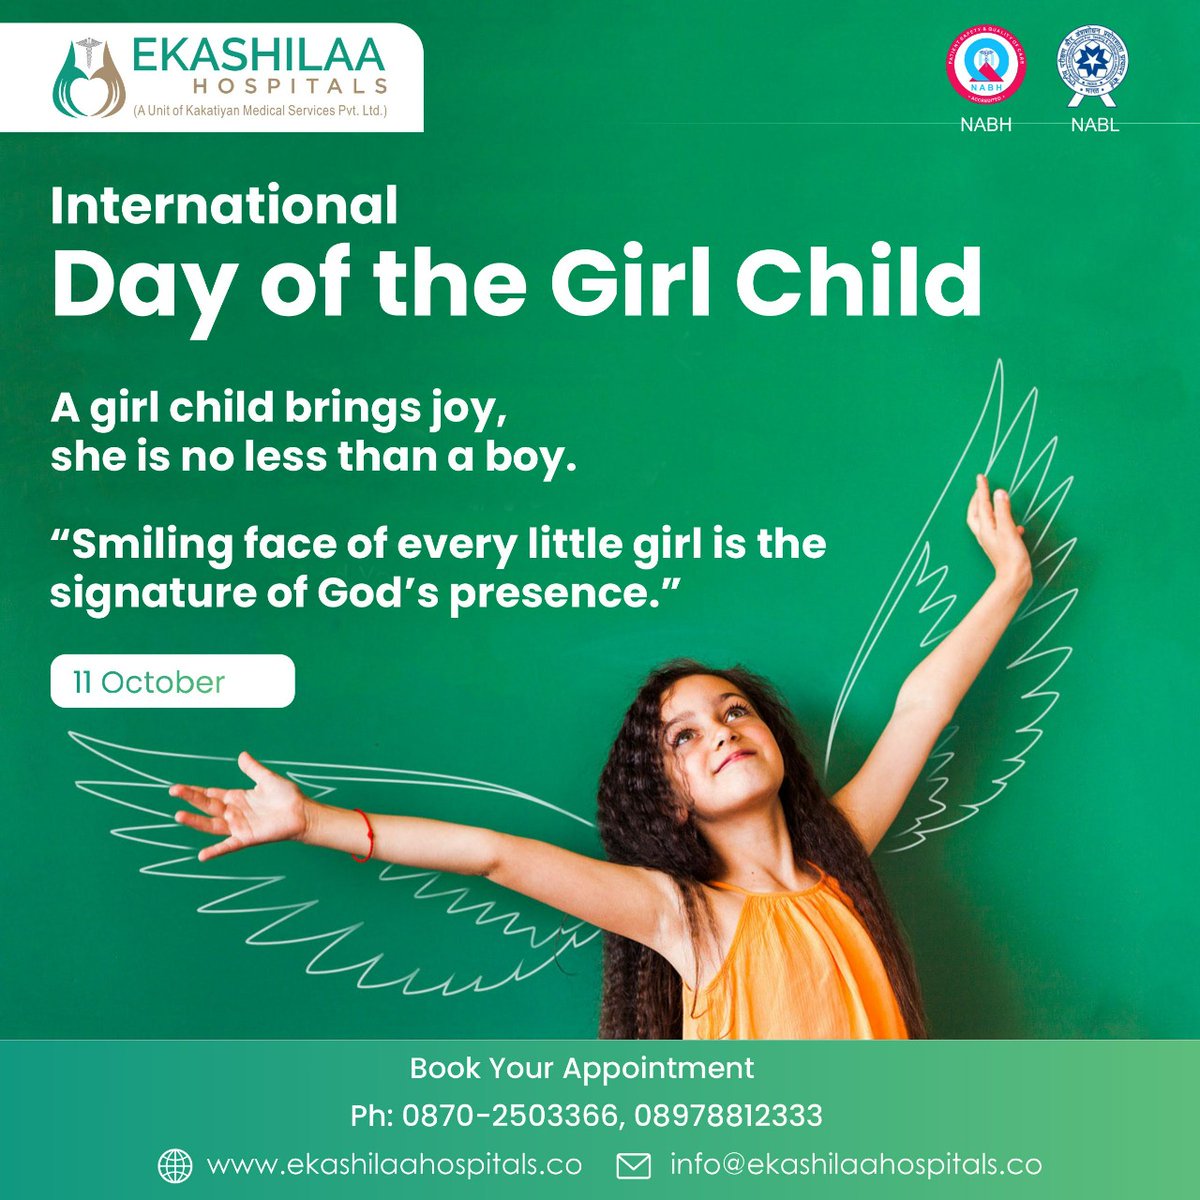 The world will be a better place to live the day a girl child is as happy as the other gender.

Happy International Girl Child Day.

#GirlChildDay #girlchild #EkashilaaHospital  #warangal #health